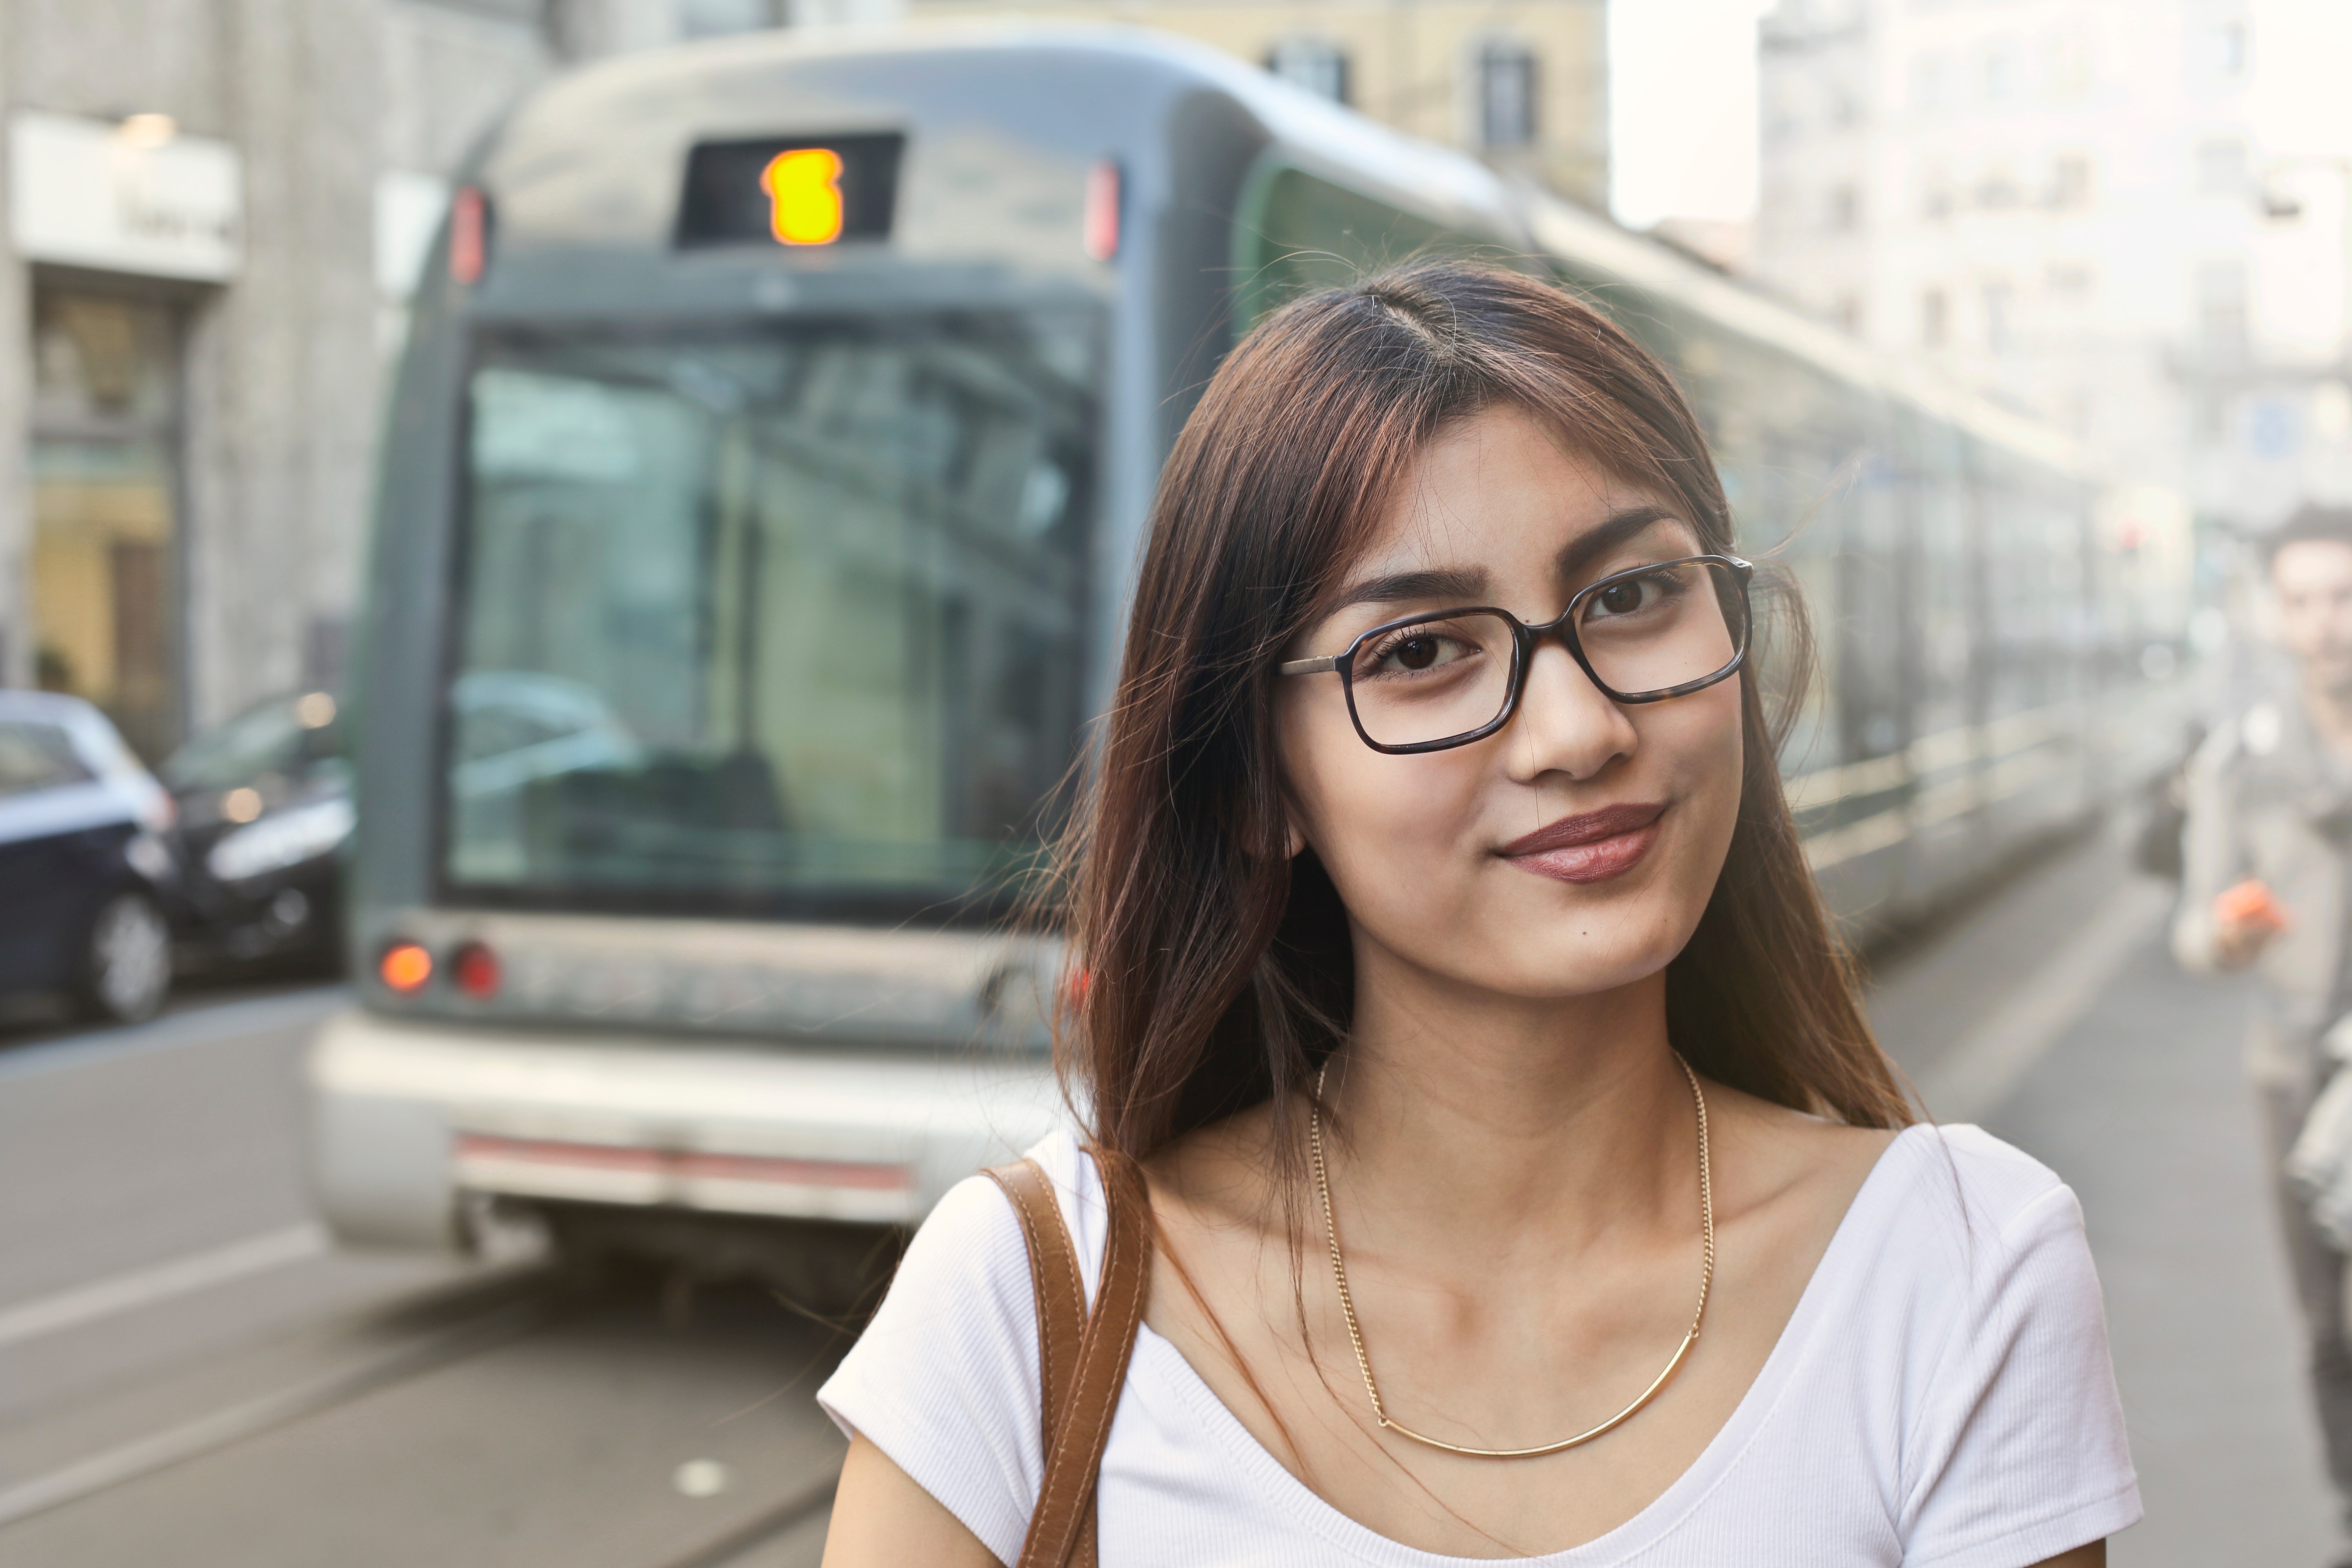 Woman in white shirt with eyeglasses standing near train photo